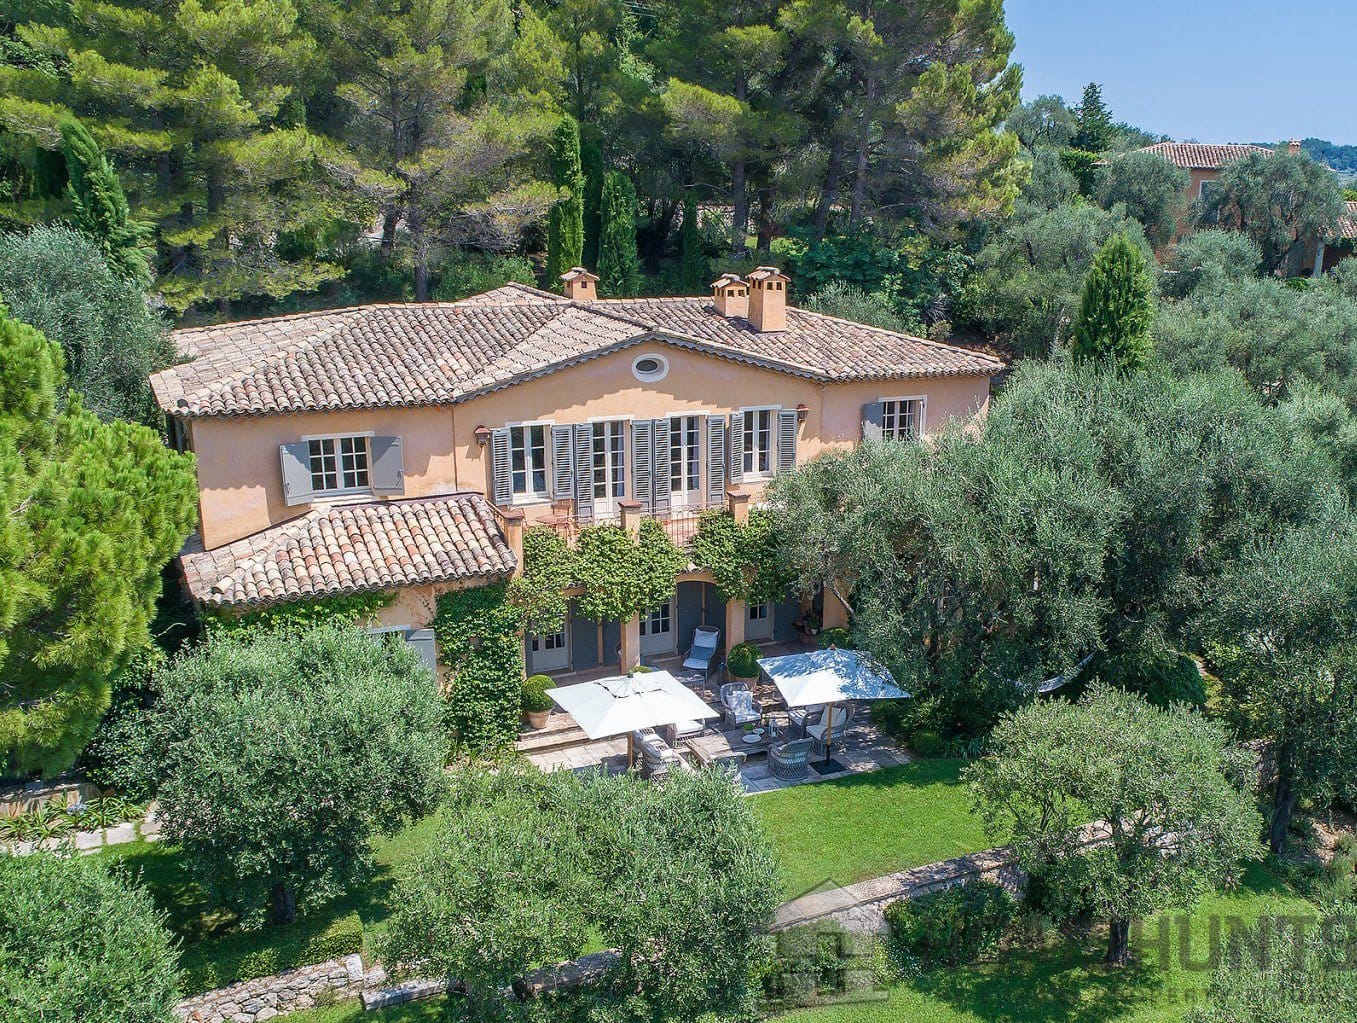 12 Bedroom Castle/Estates in Chateauneuf Grasse 11